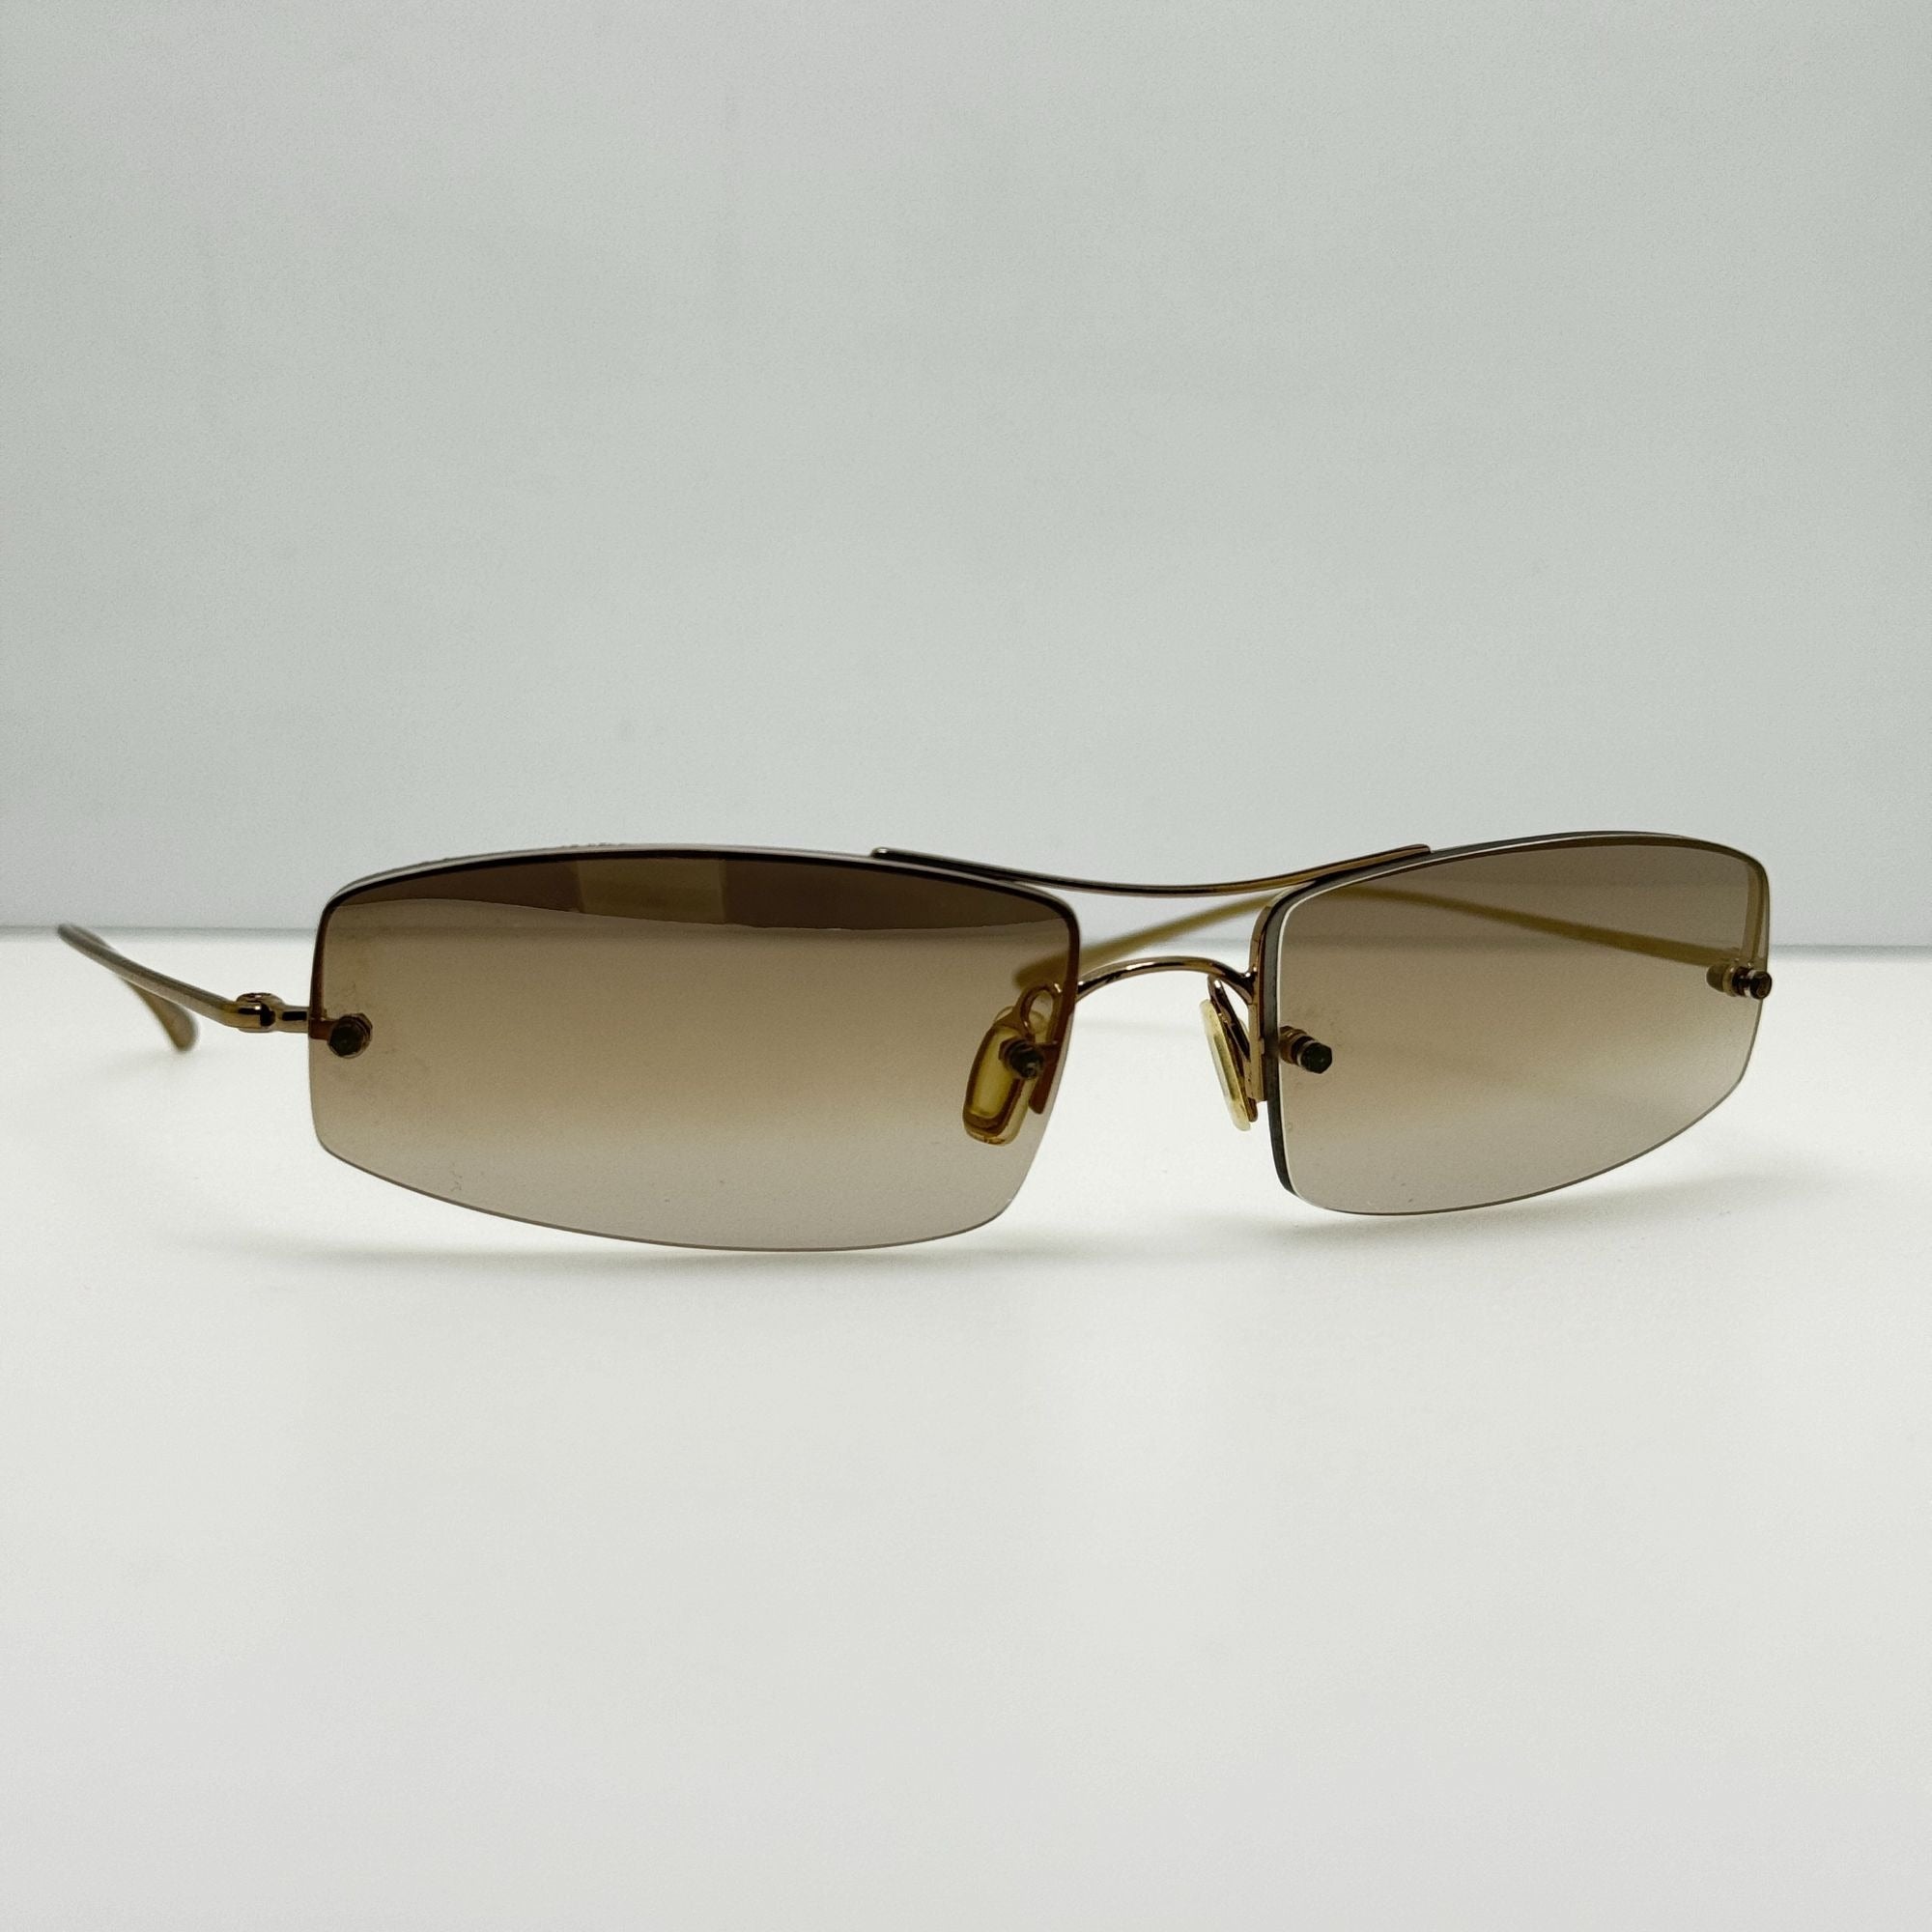 Oliver-Peoples-Sunglasses-Ritcher-58-16-132-Japan-Sunglasses